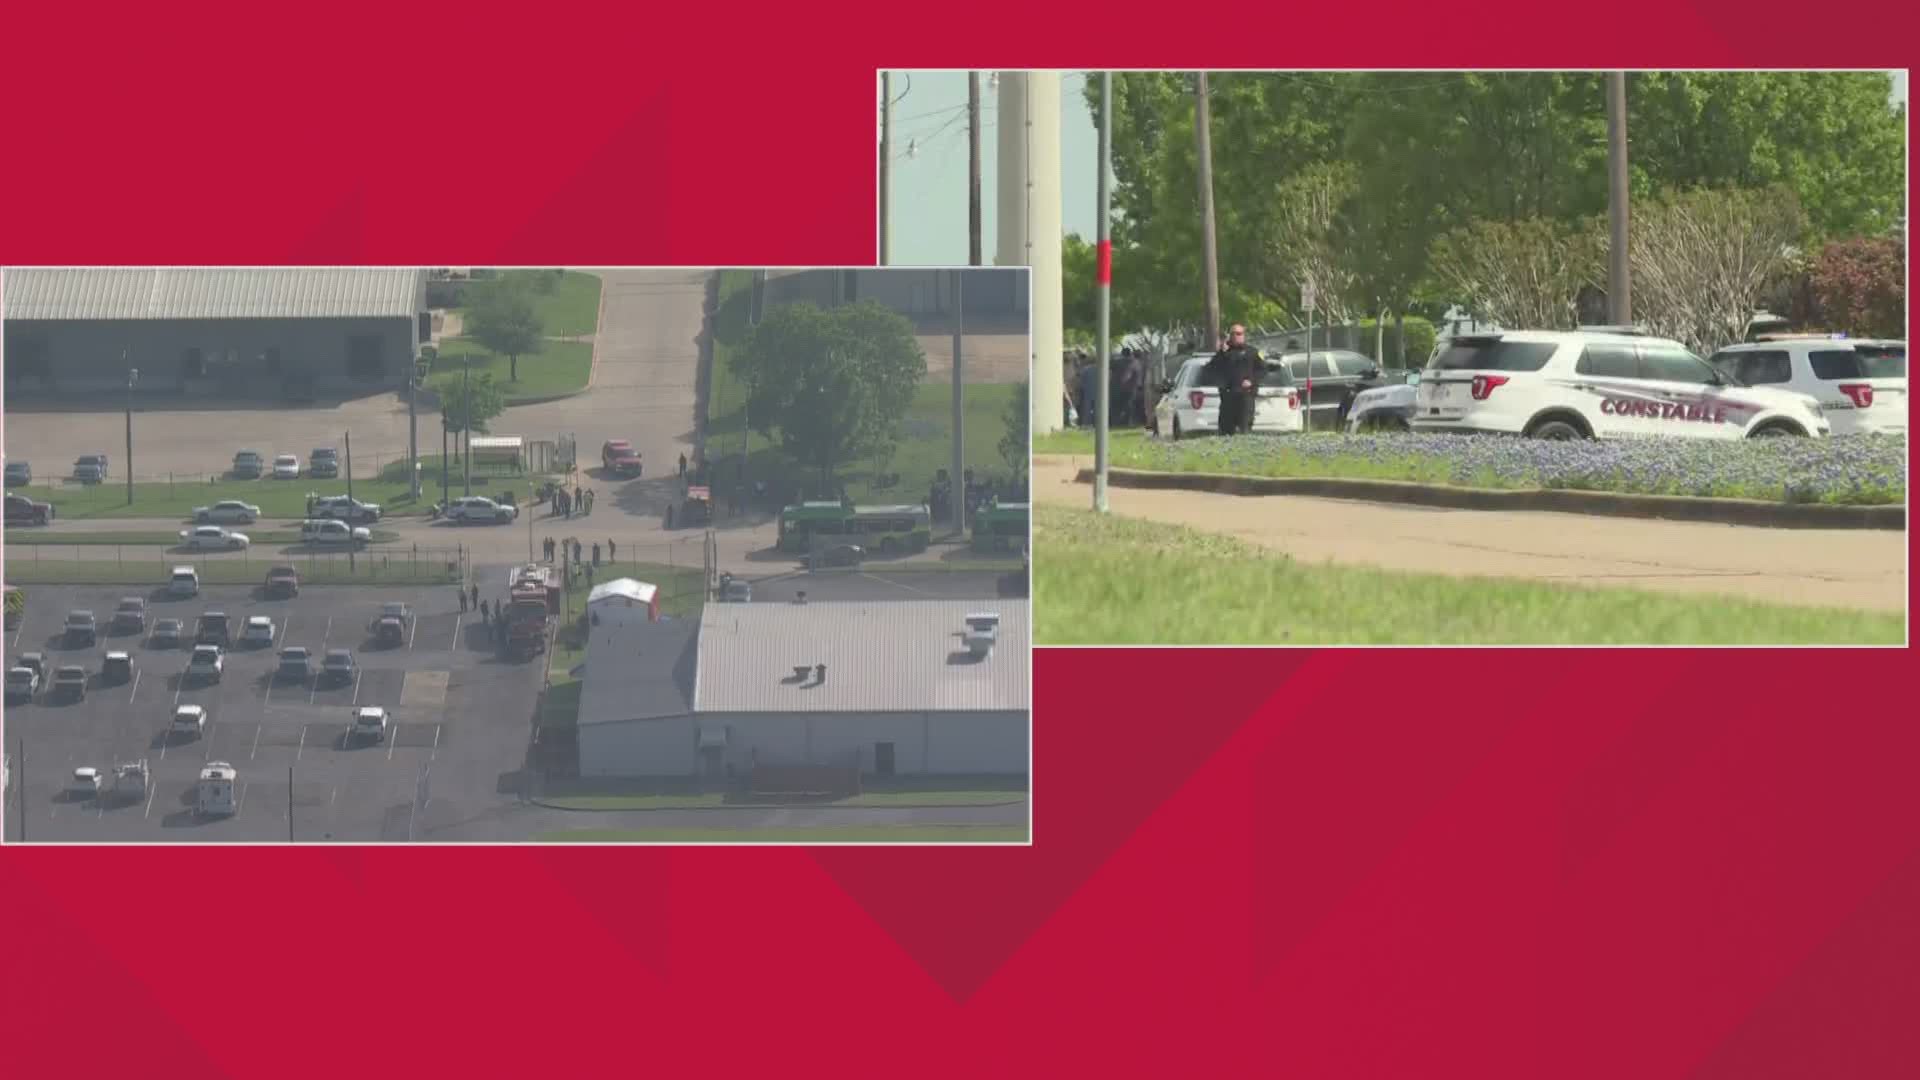 A DPS Trooper was shot in Grimes County in connection with the deadly shooting incident at a Bryan business.